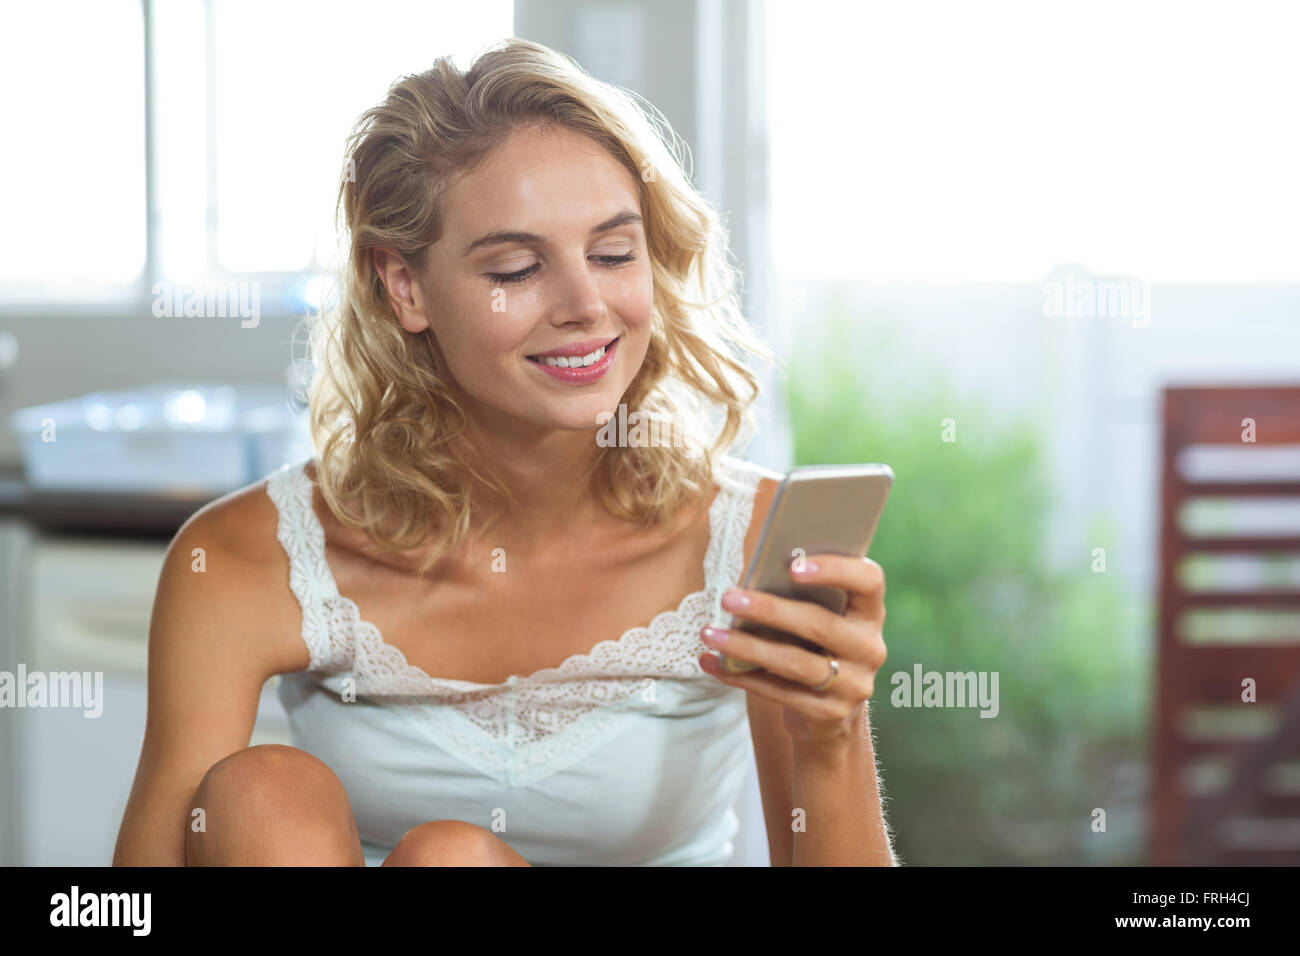 Young woman using mobile phone Banque D'Images